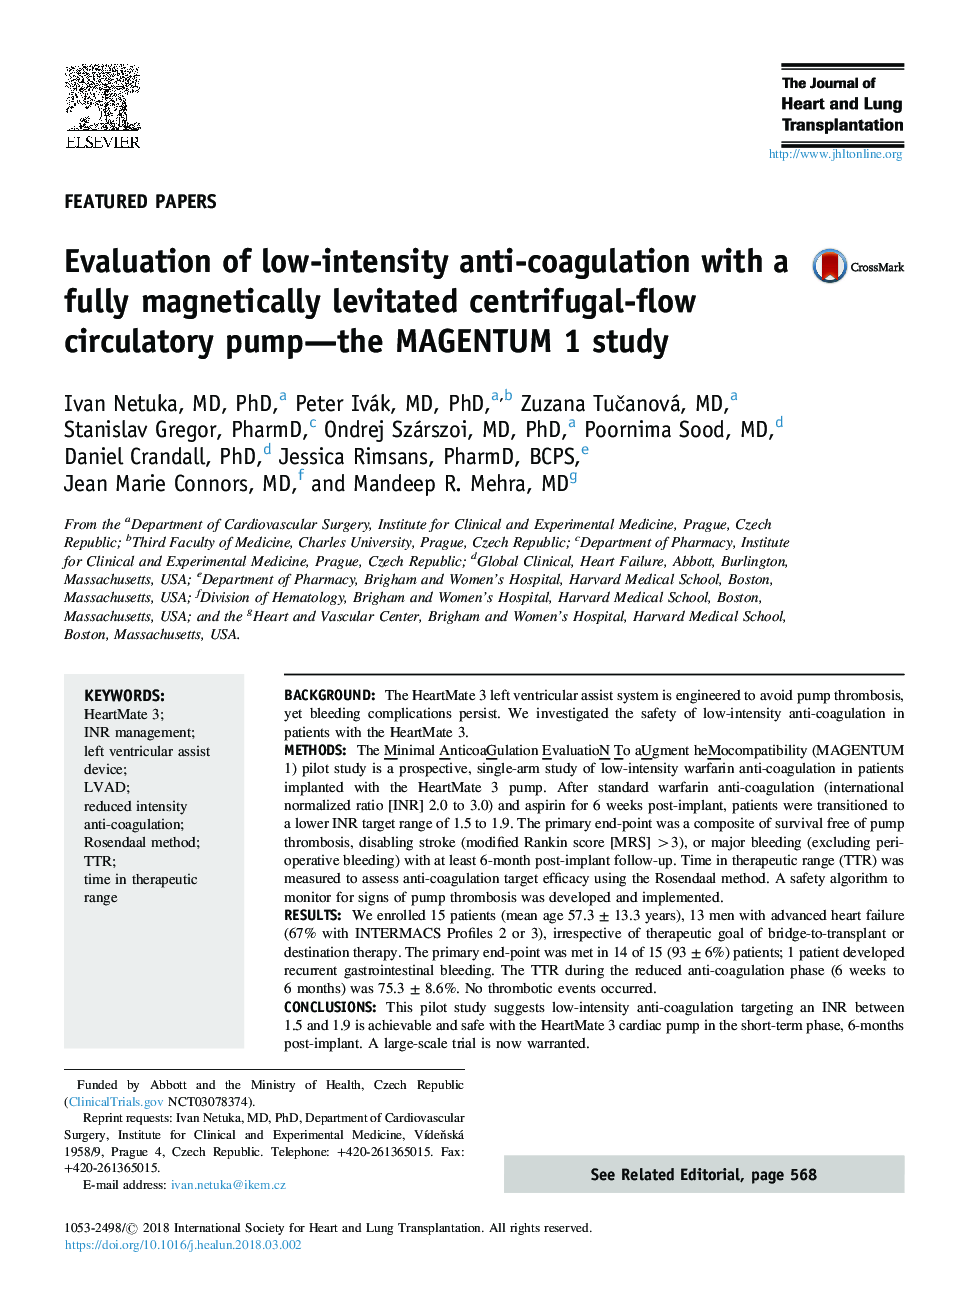 Evaluation of low-intensity anti-coagulation with a fully magnetically levitated centrifugal-flow circulatory pump-the MAGENTUM 1 study